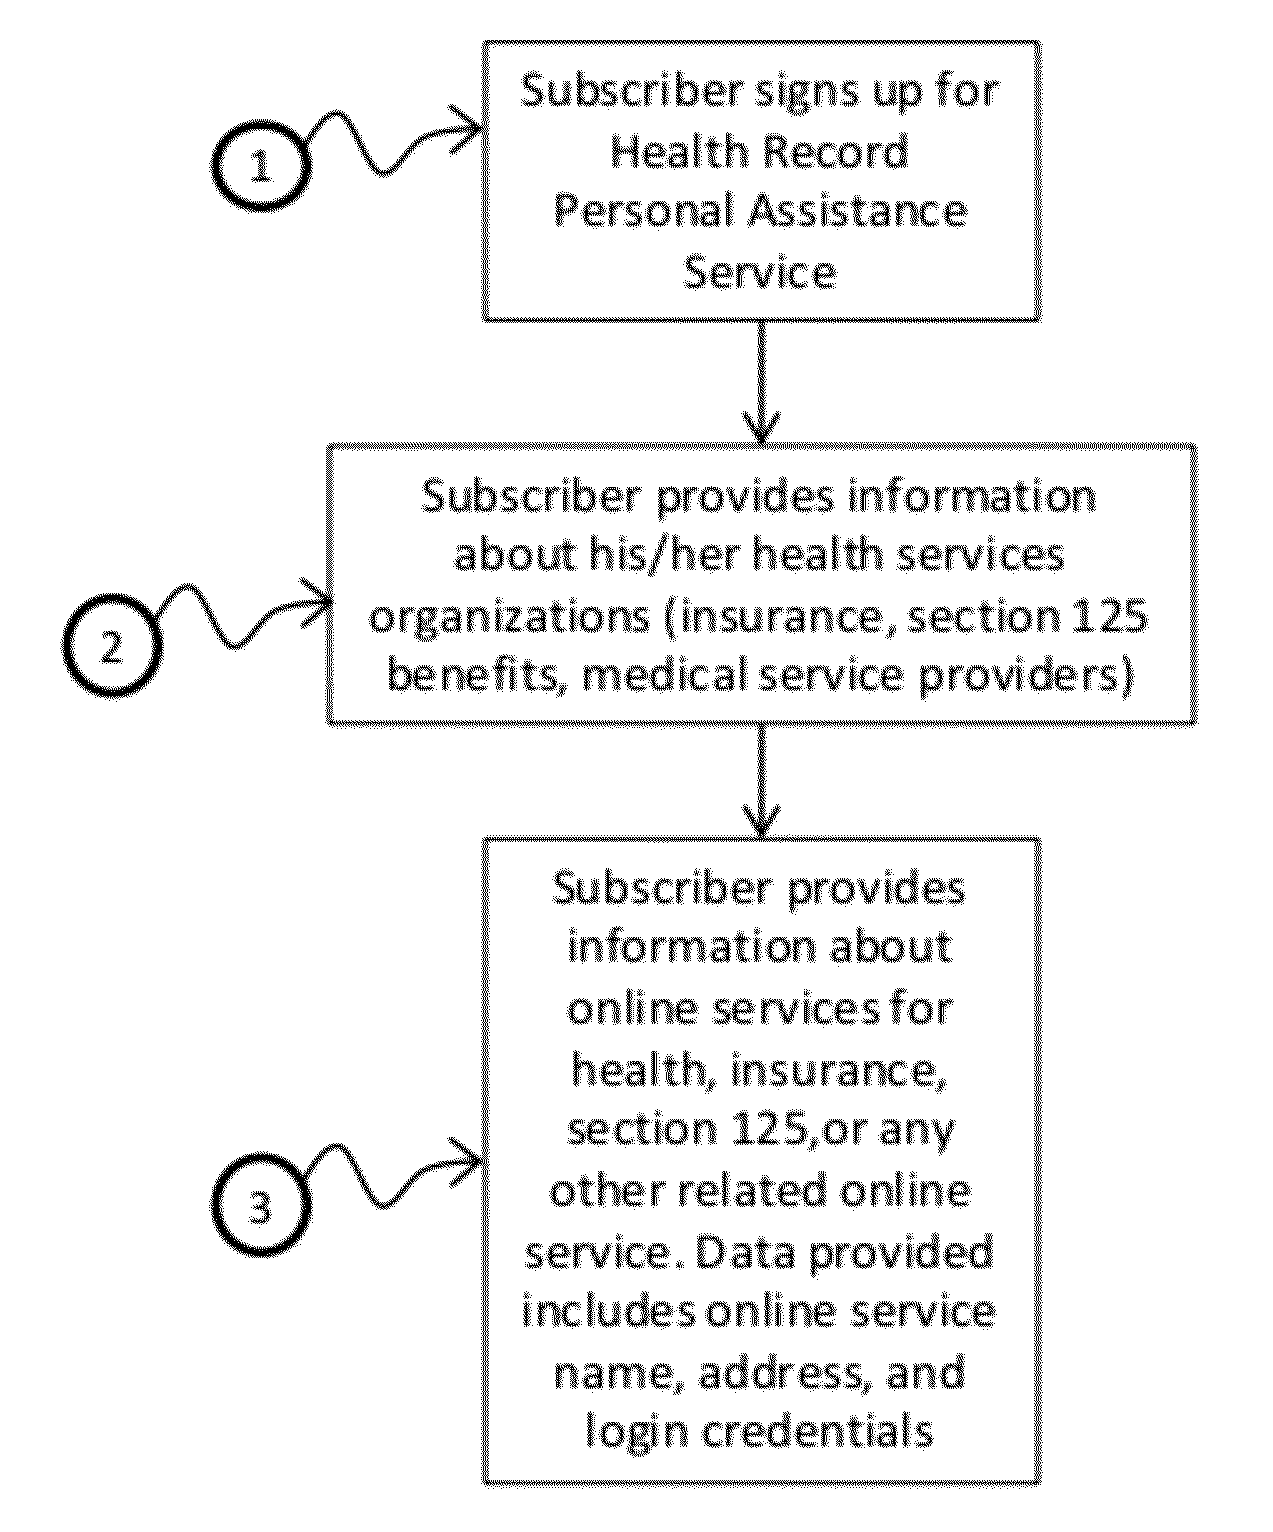 System and method of automated data analysis for implementing health records personal assistant with automated correlation of medical services to insurance and tax benefits for improved personal health cost management